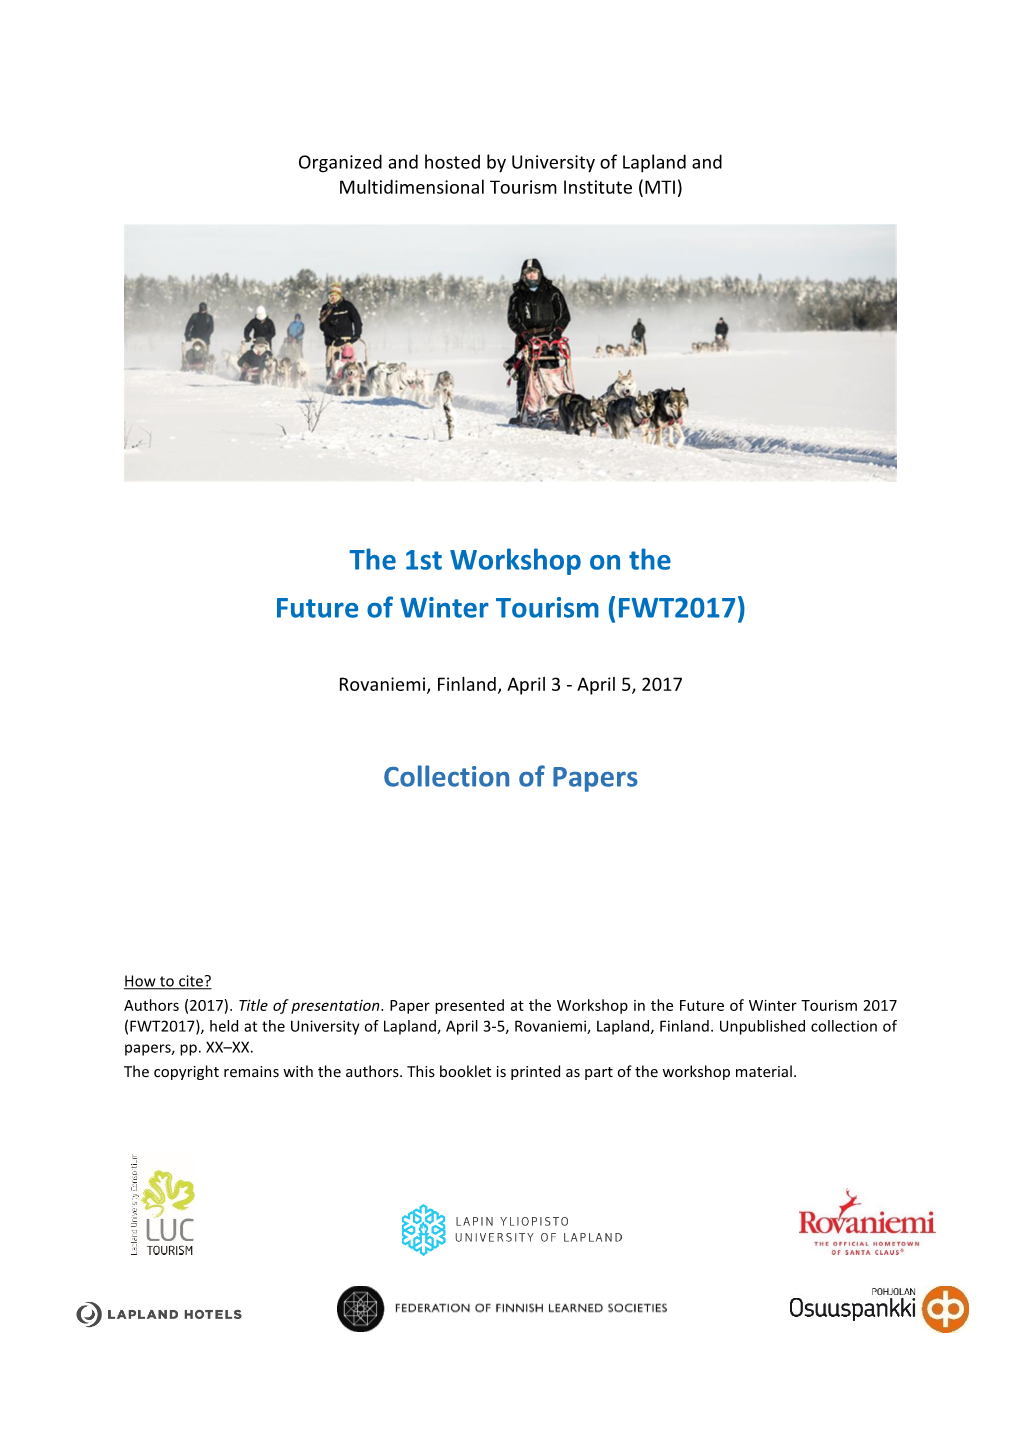 The 1St Workshop on the Future of Winter Tourism (FWT2017) Collection of Papers